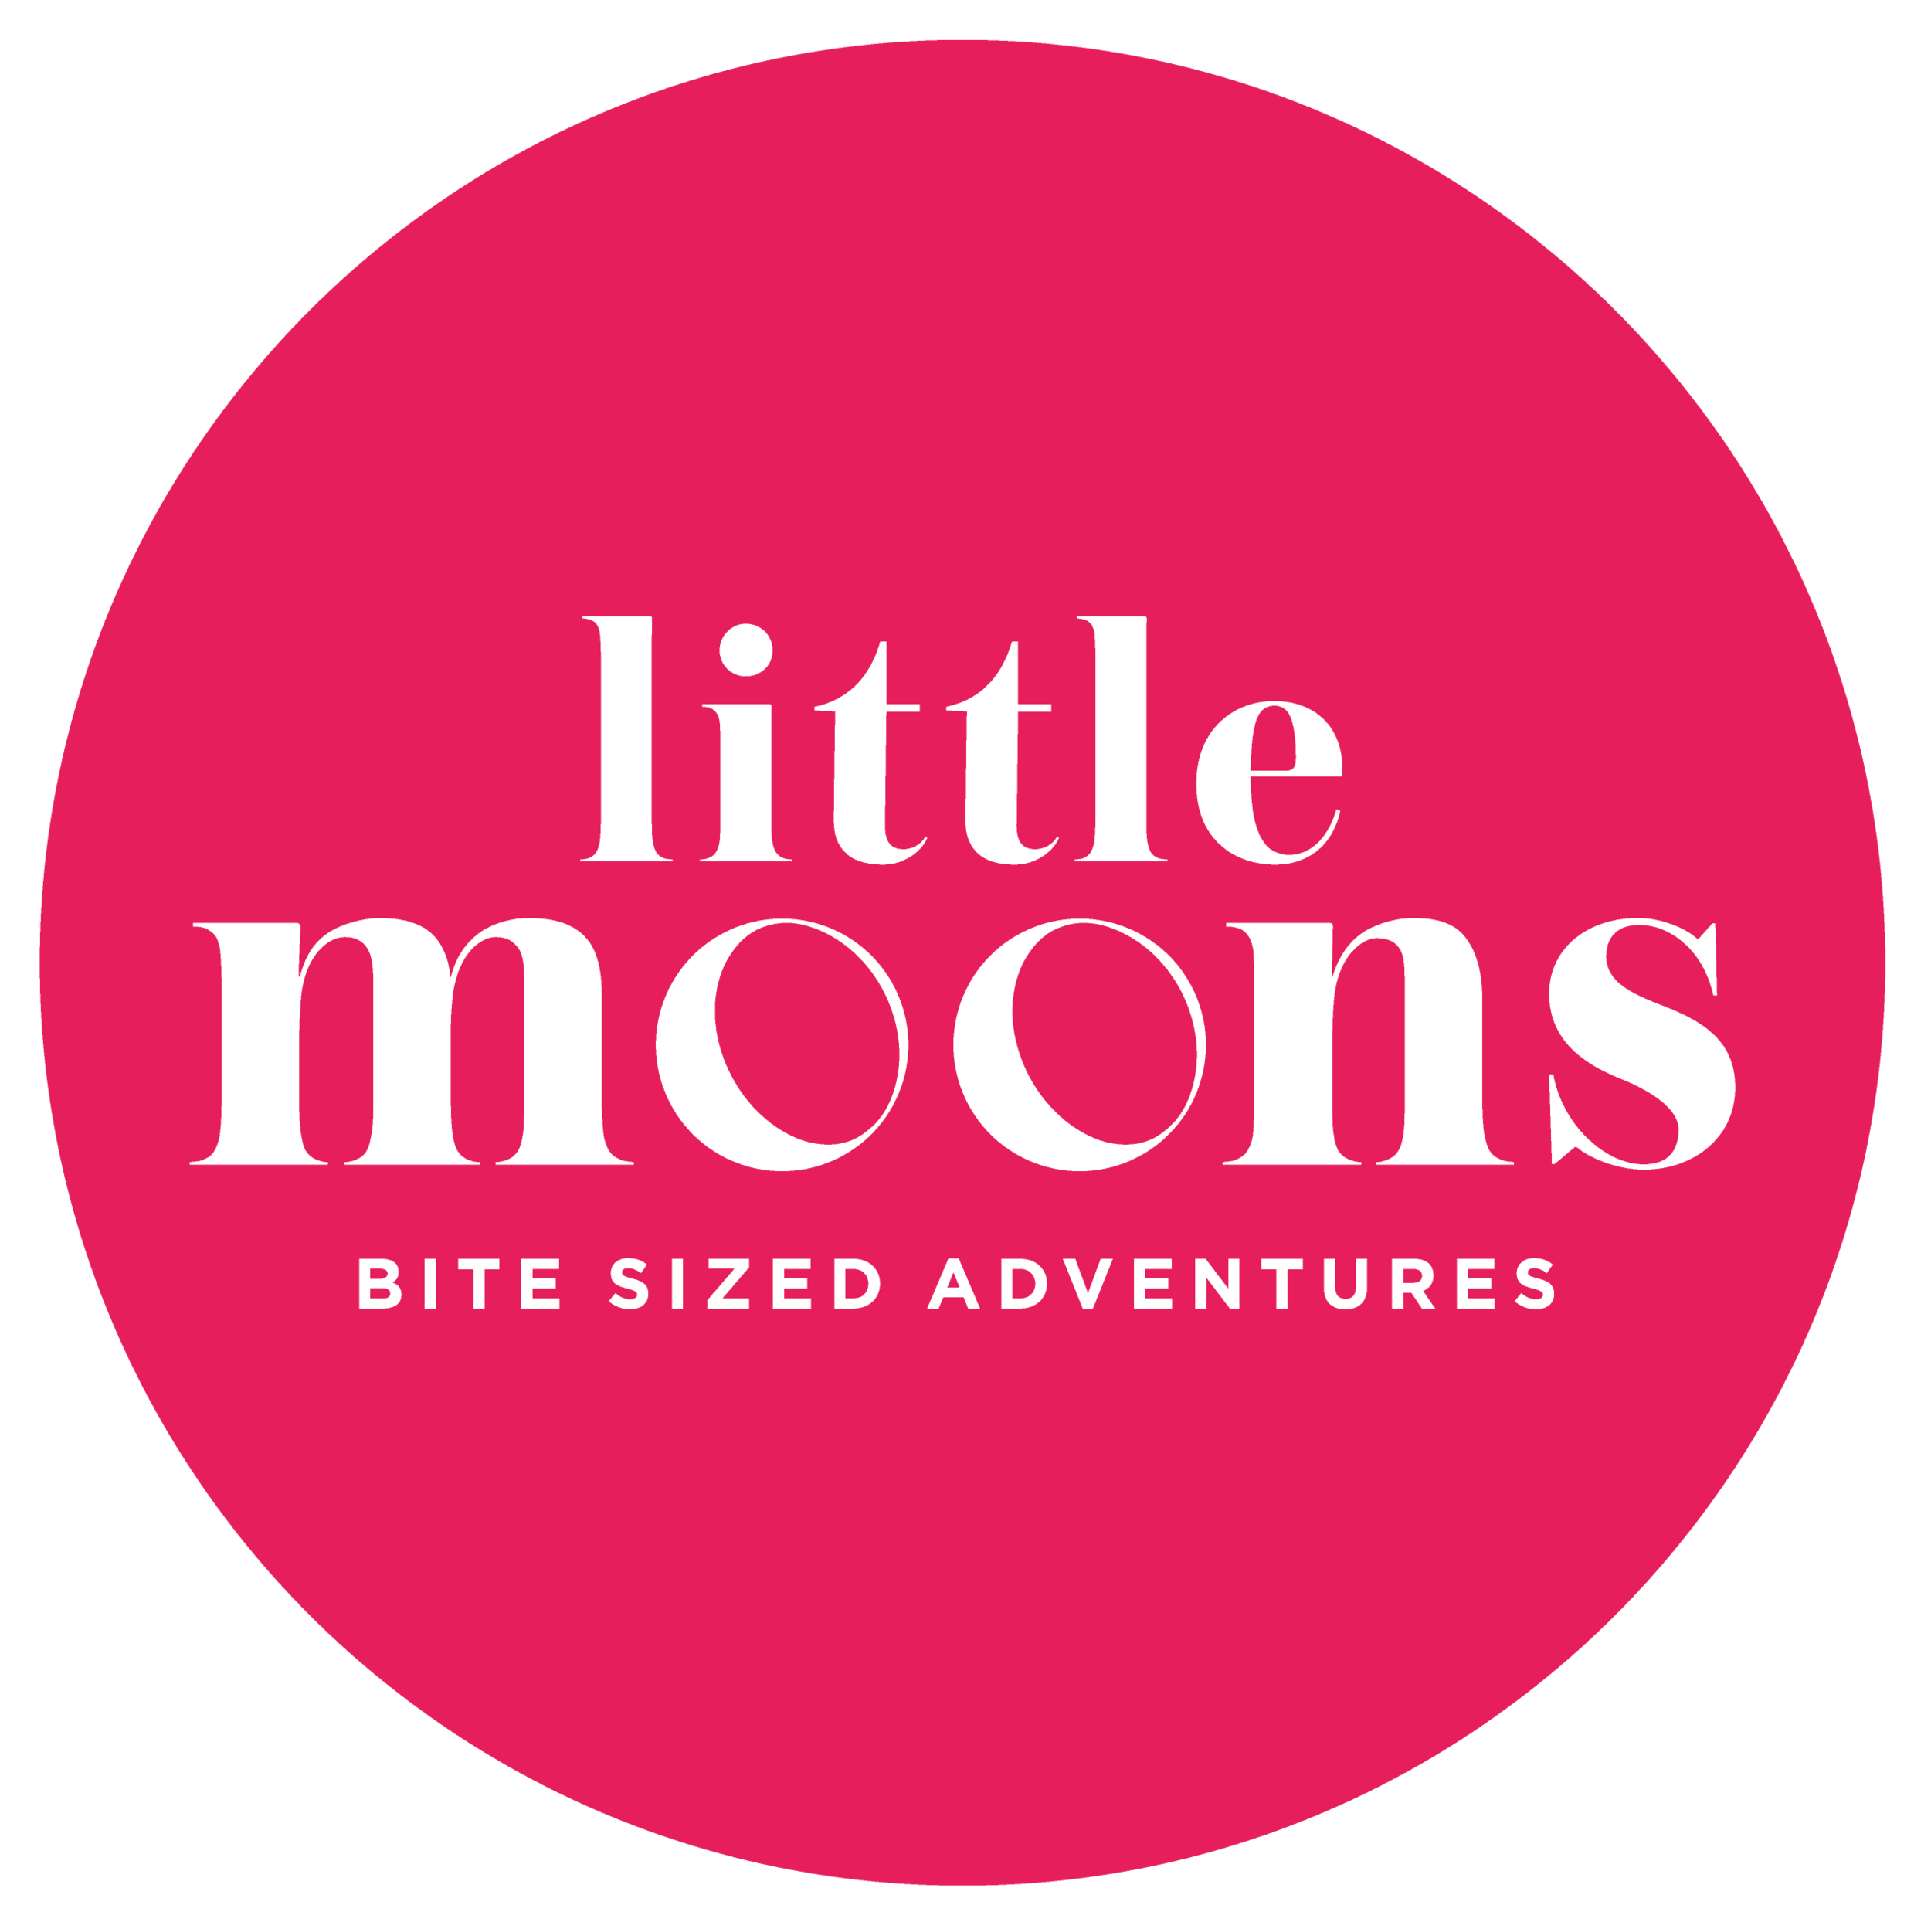 LMO_Logo_Bite_Sized_Adventures_White on Pink-01 (002).png